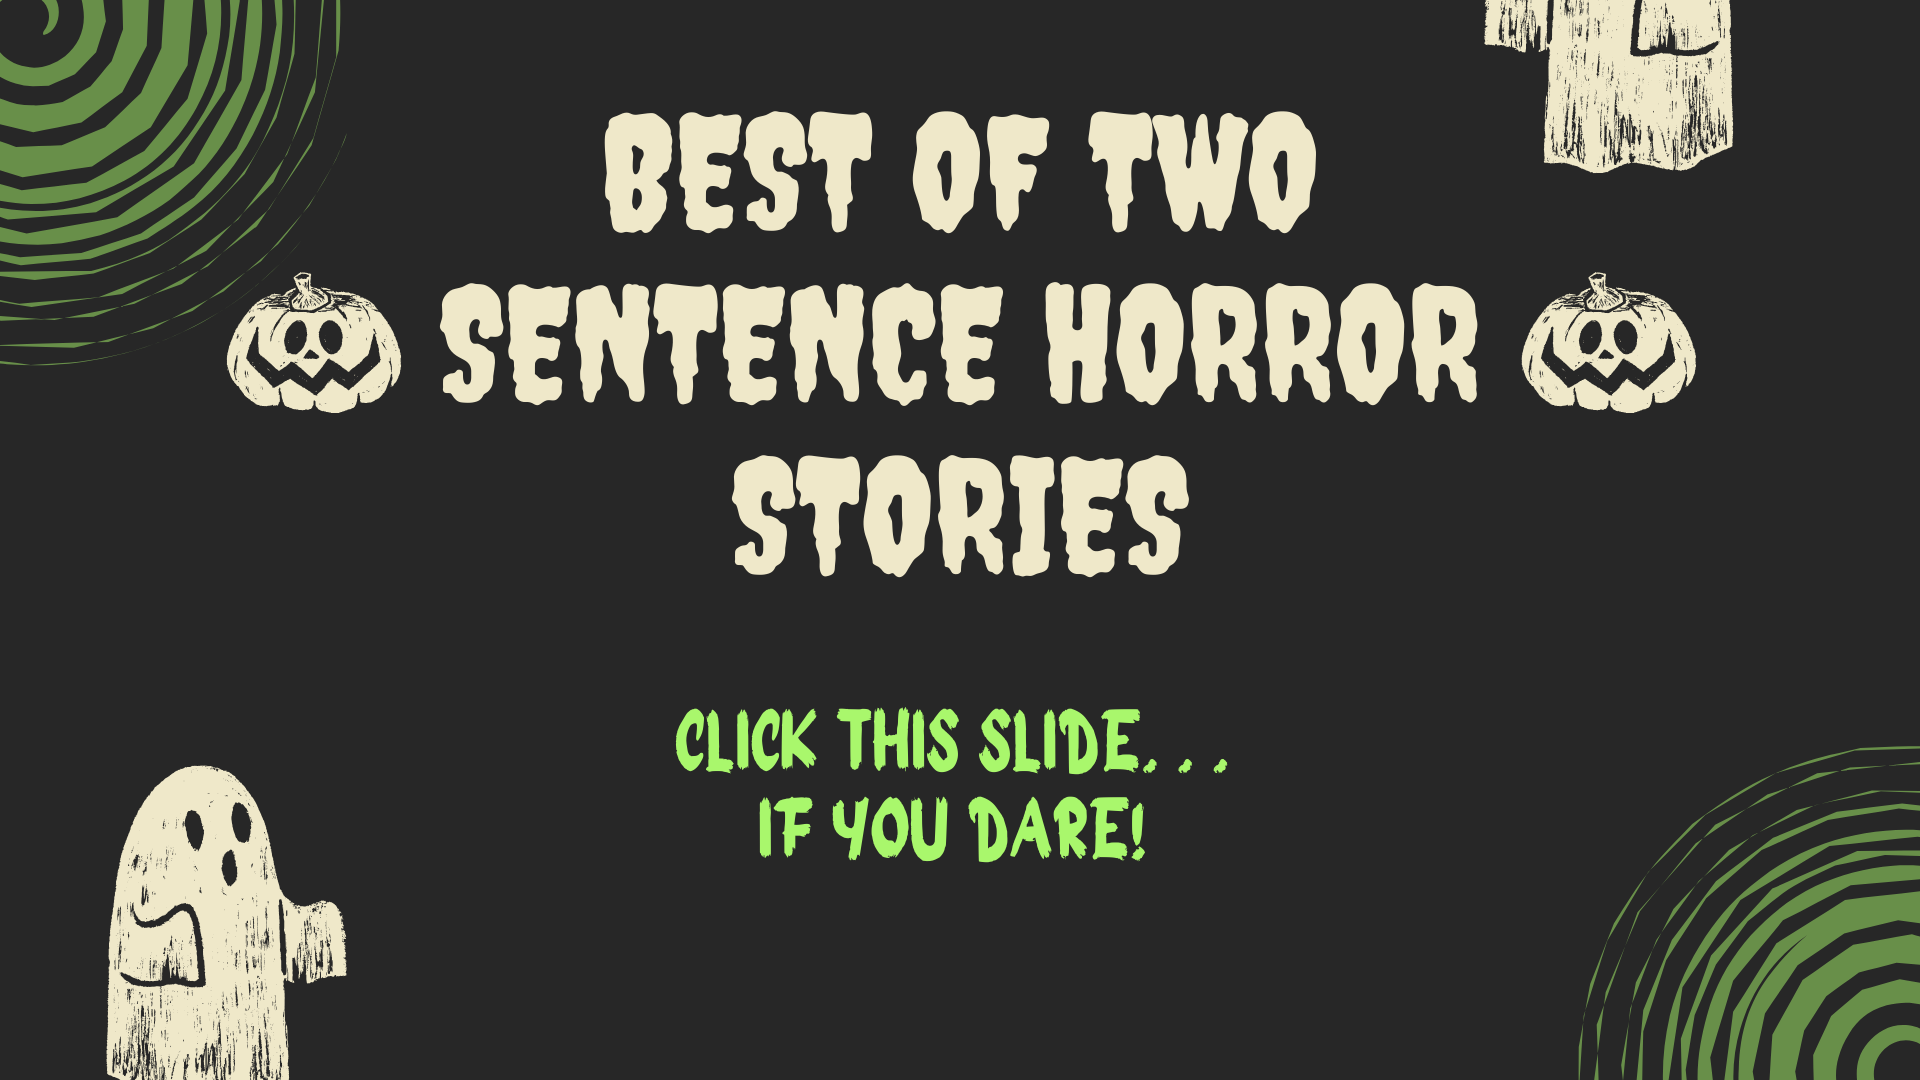 Best of Two Sentence Horror Stories: Click this slide, if you dare